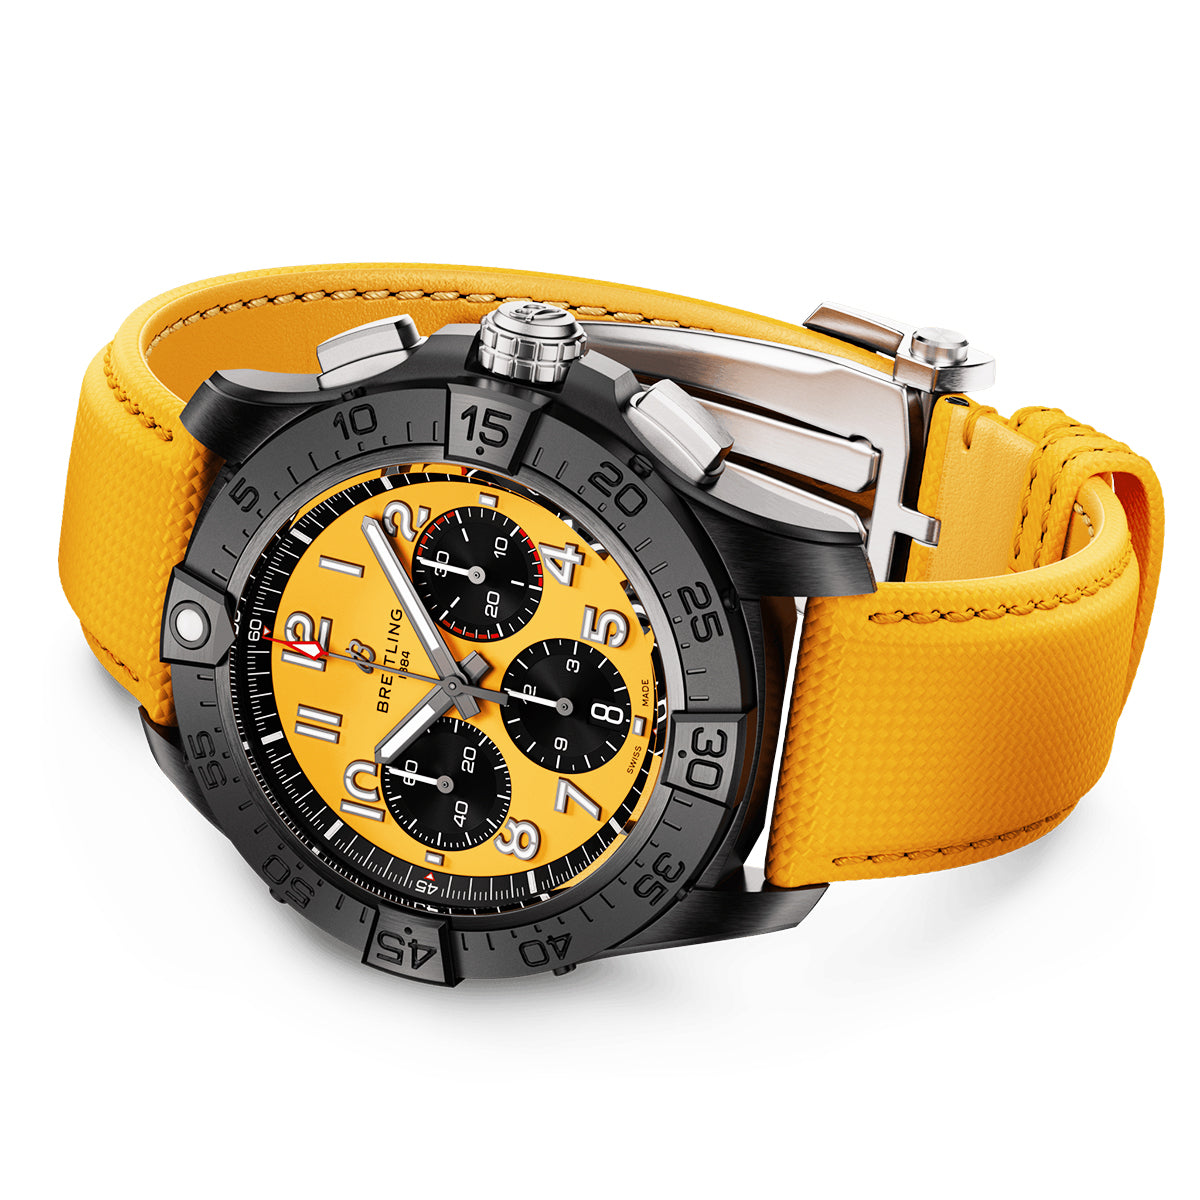 Avenger Night Mission 44mm Black Ceramic & Yellow Dial Watch